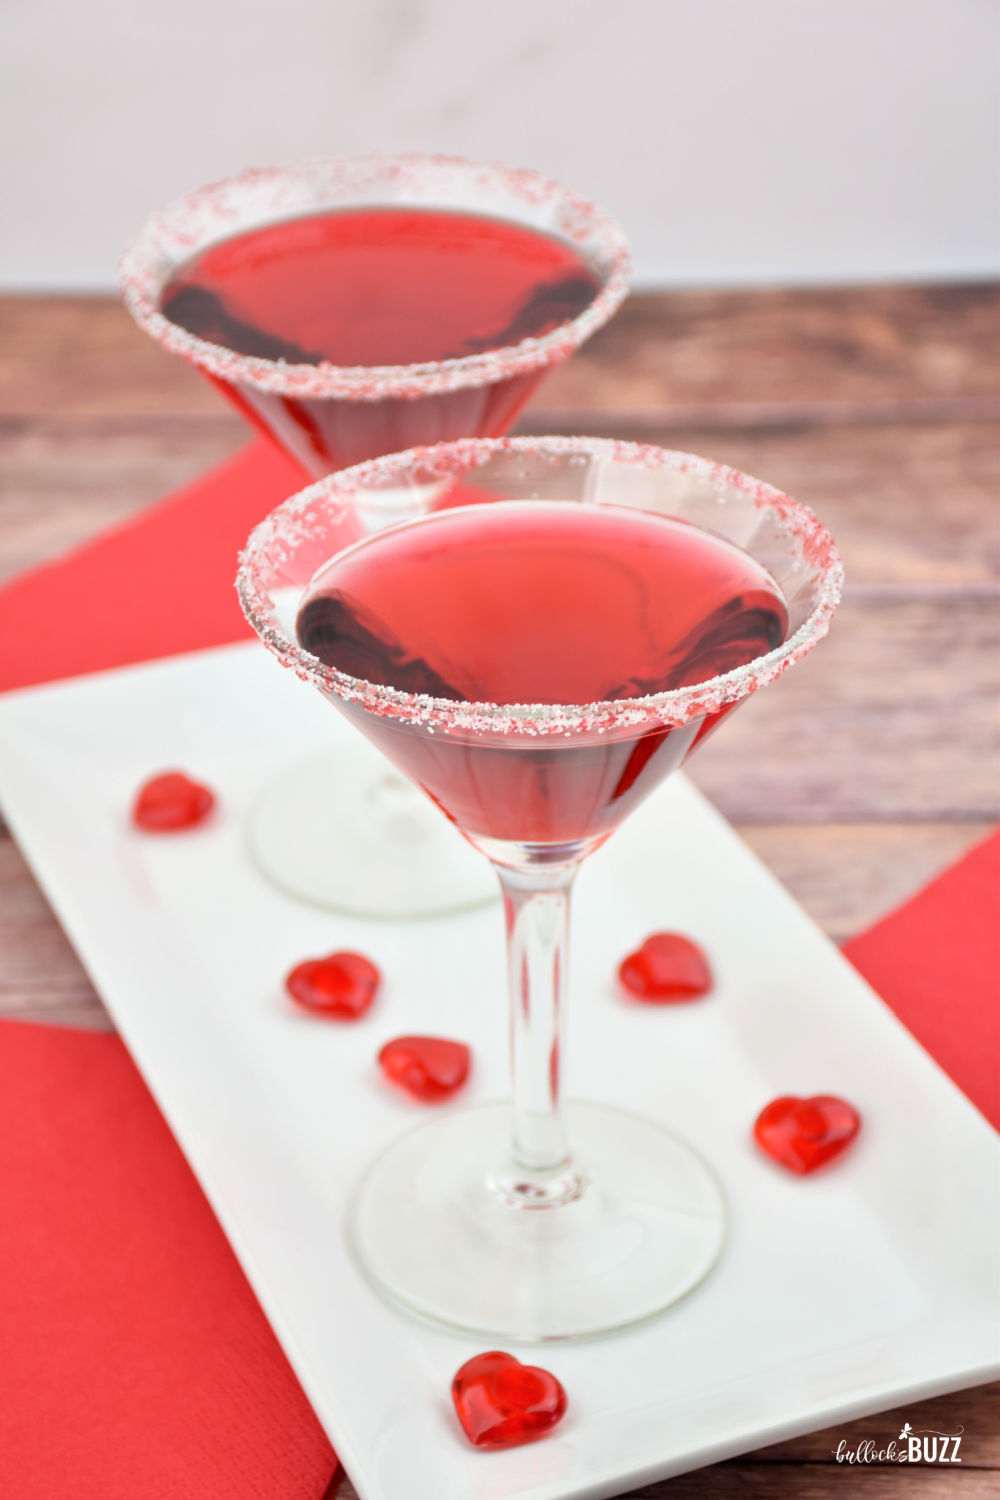 This fruity Cupid's Heart Valentine's Day Cocktail recipe is a perfectly sweet way to add a splash of romance or fun to your celebration.